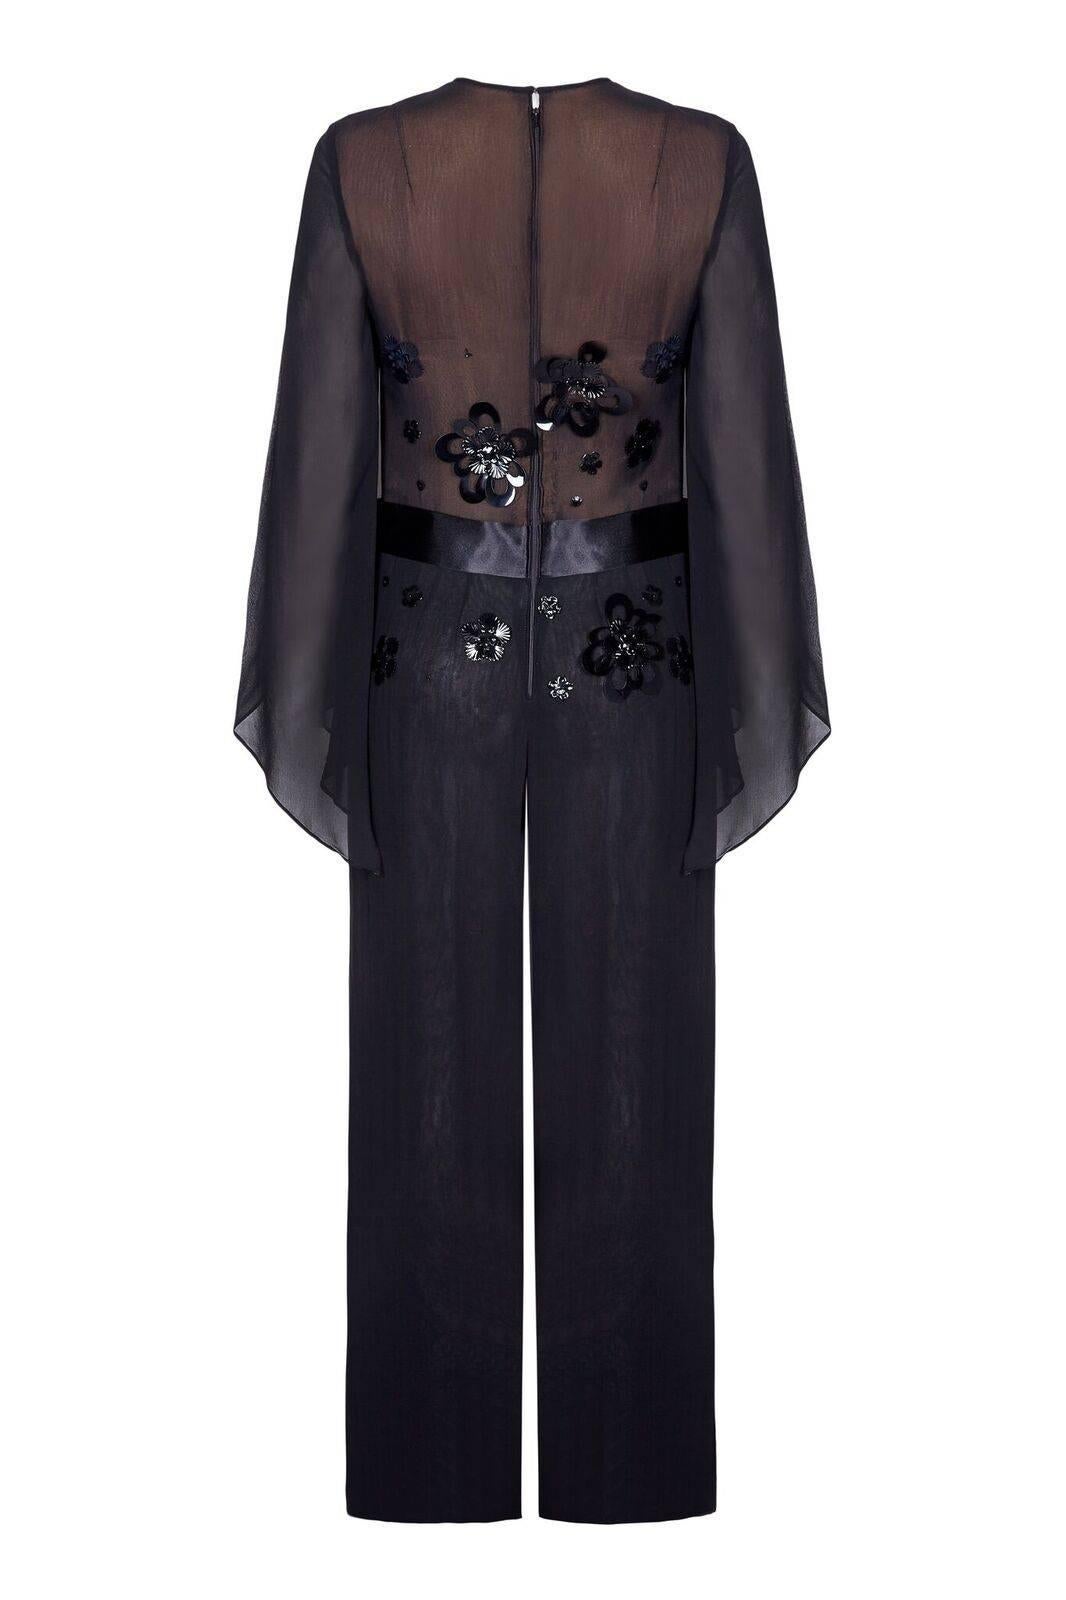 This stunning vintage 1970s black chiffon jumpsuit with sequin embellishment boasts some unique and exciting design features. Couture made by Pauline of Northwood, the black chiffon overlay is fully lined from the waist down with an additional layer